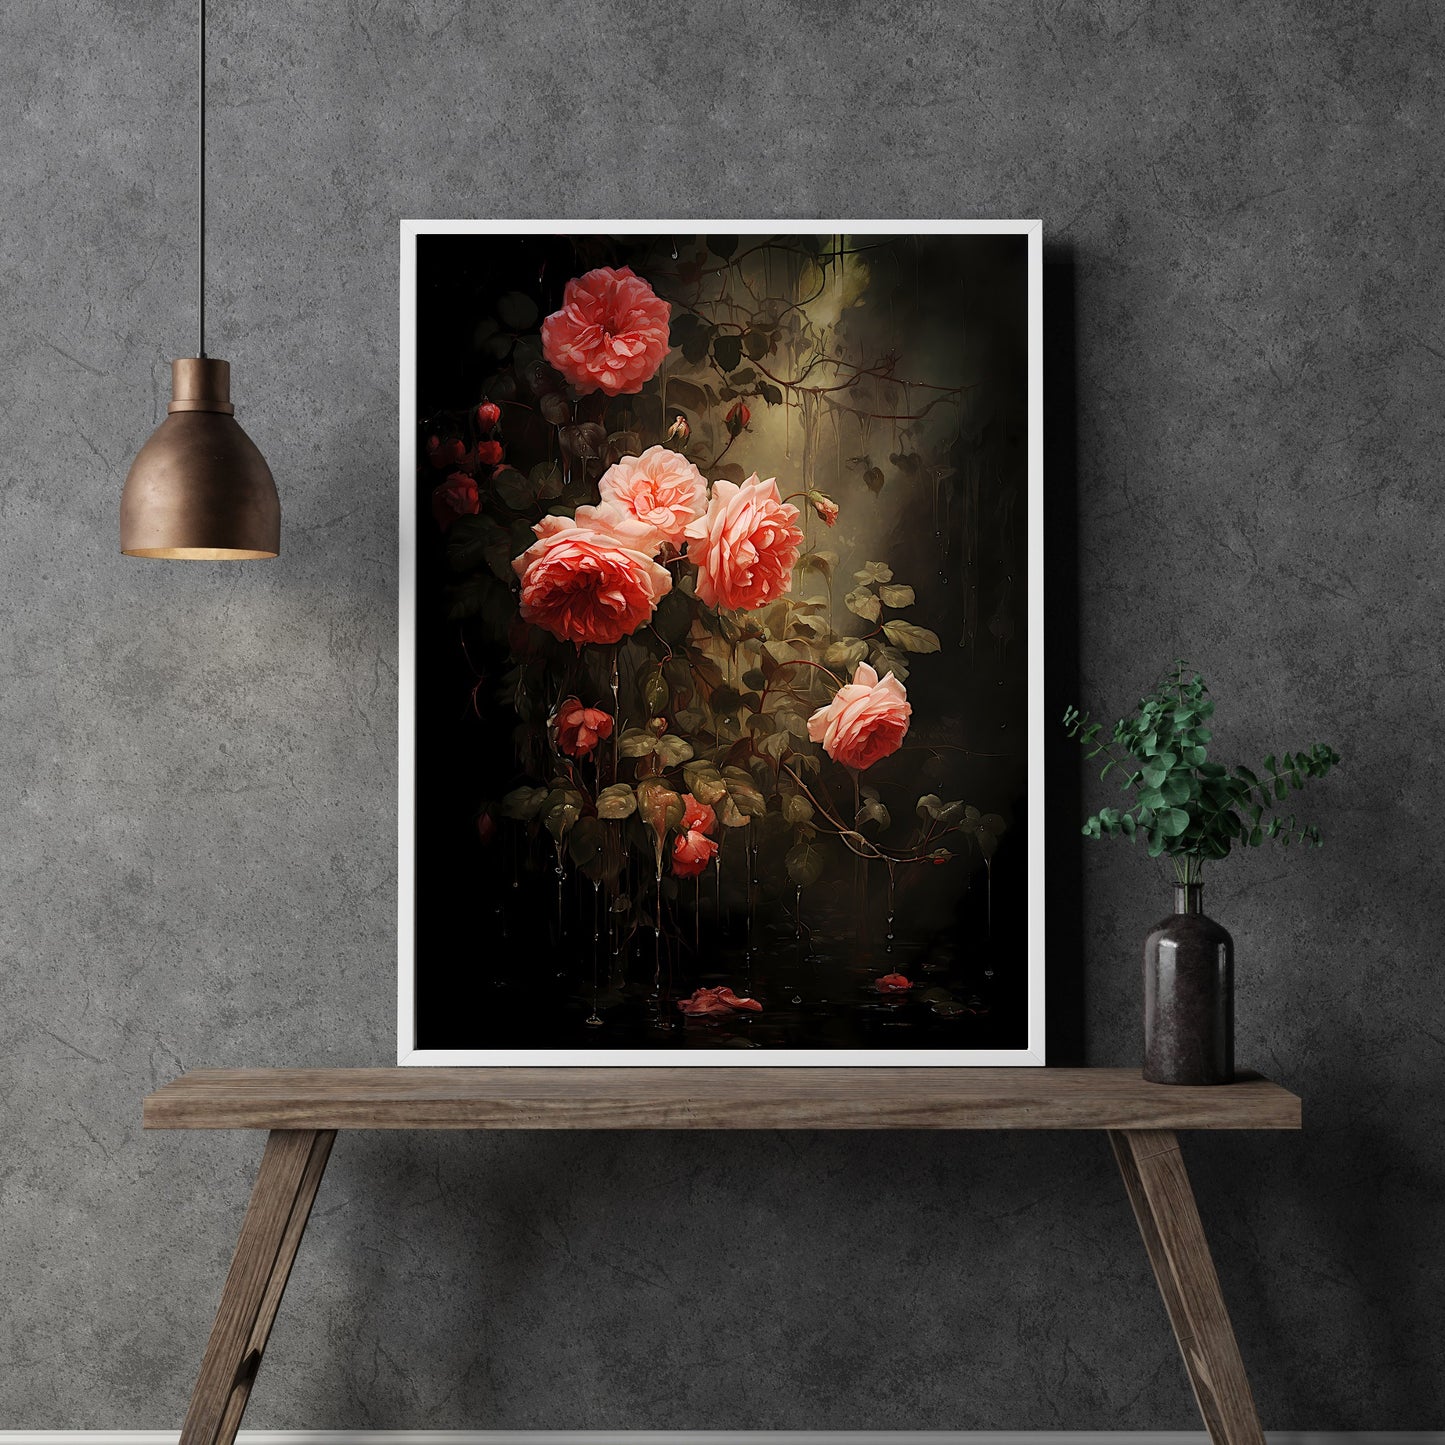 Driping Roses Wall Art Romantic Woodland Wall Decor Dark Cottagecore Artwork Vintage Forest Aestetic Painting Floral Rose Poster Paper Poster Print